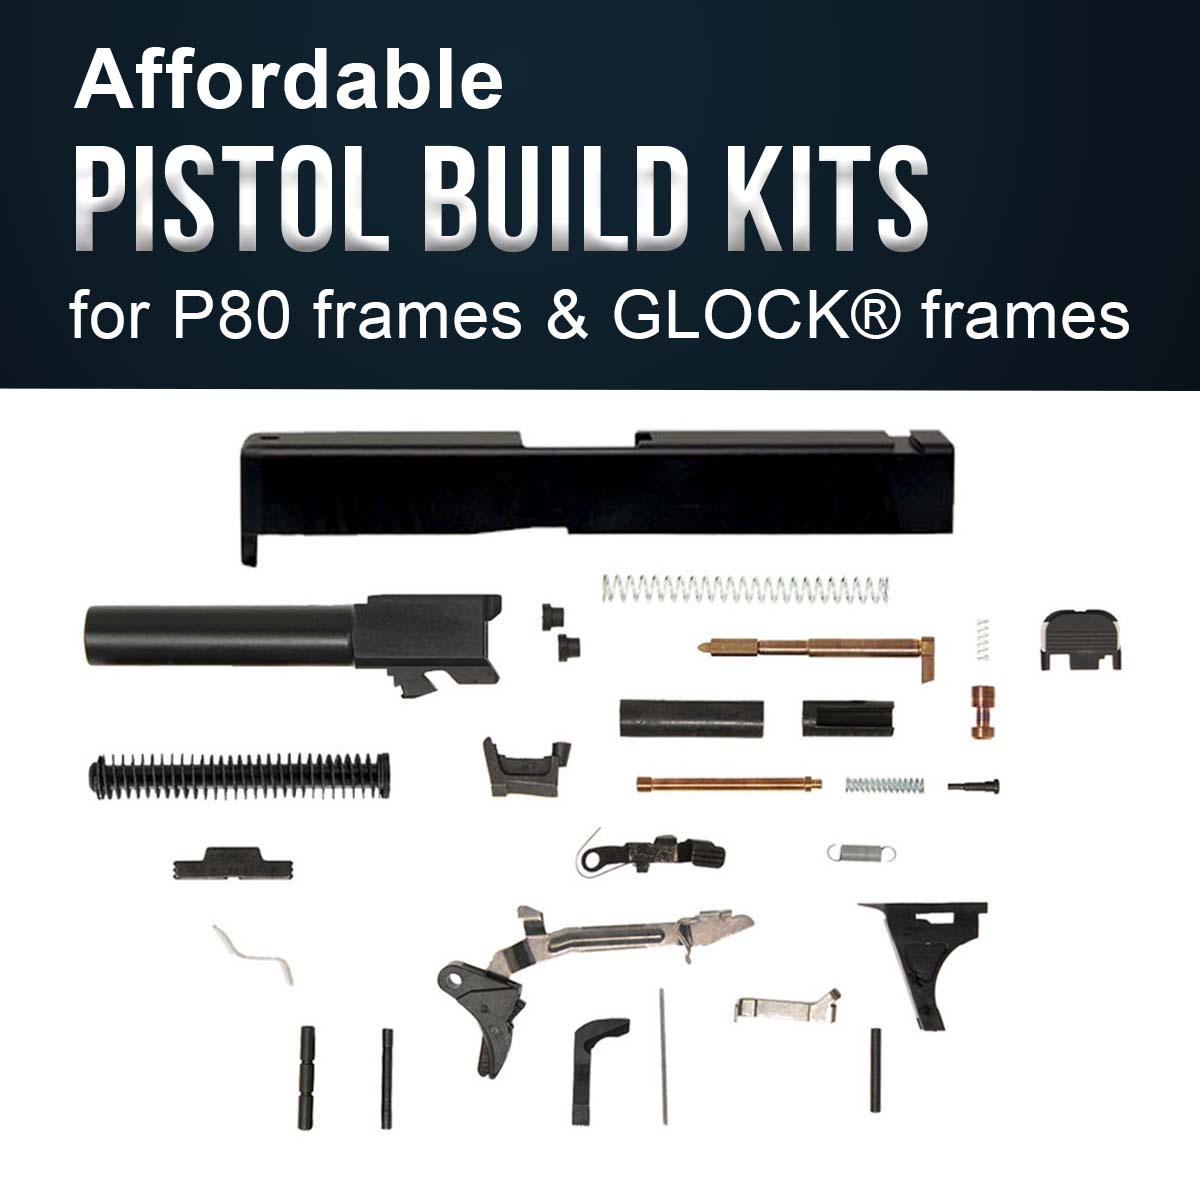 P80 Gun Builders – The Best Place to find Glock®-compatible Pistol Parts Kits